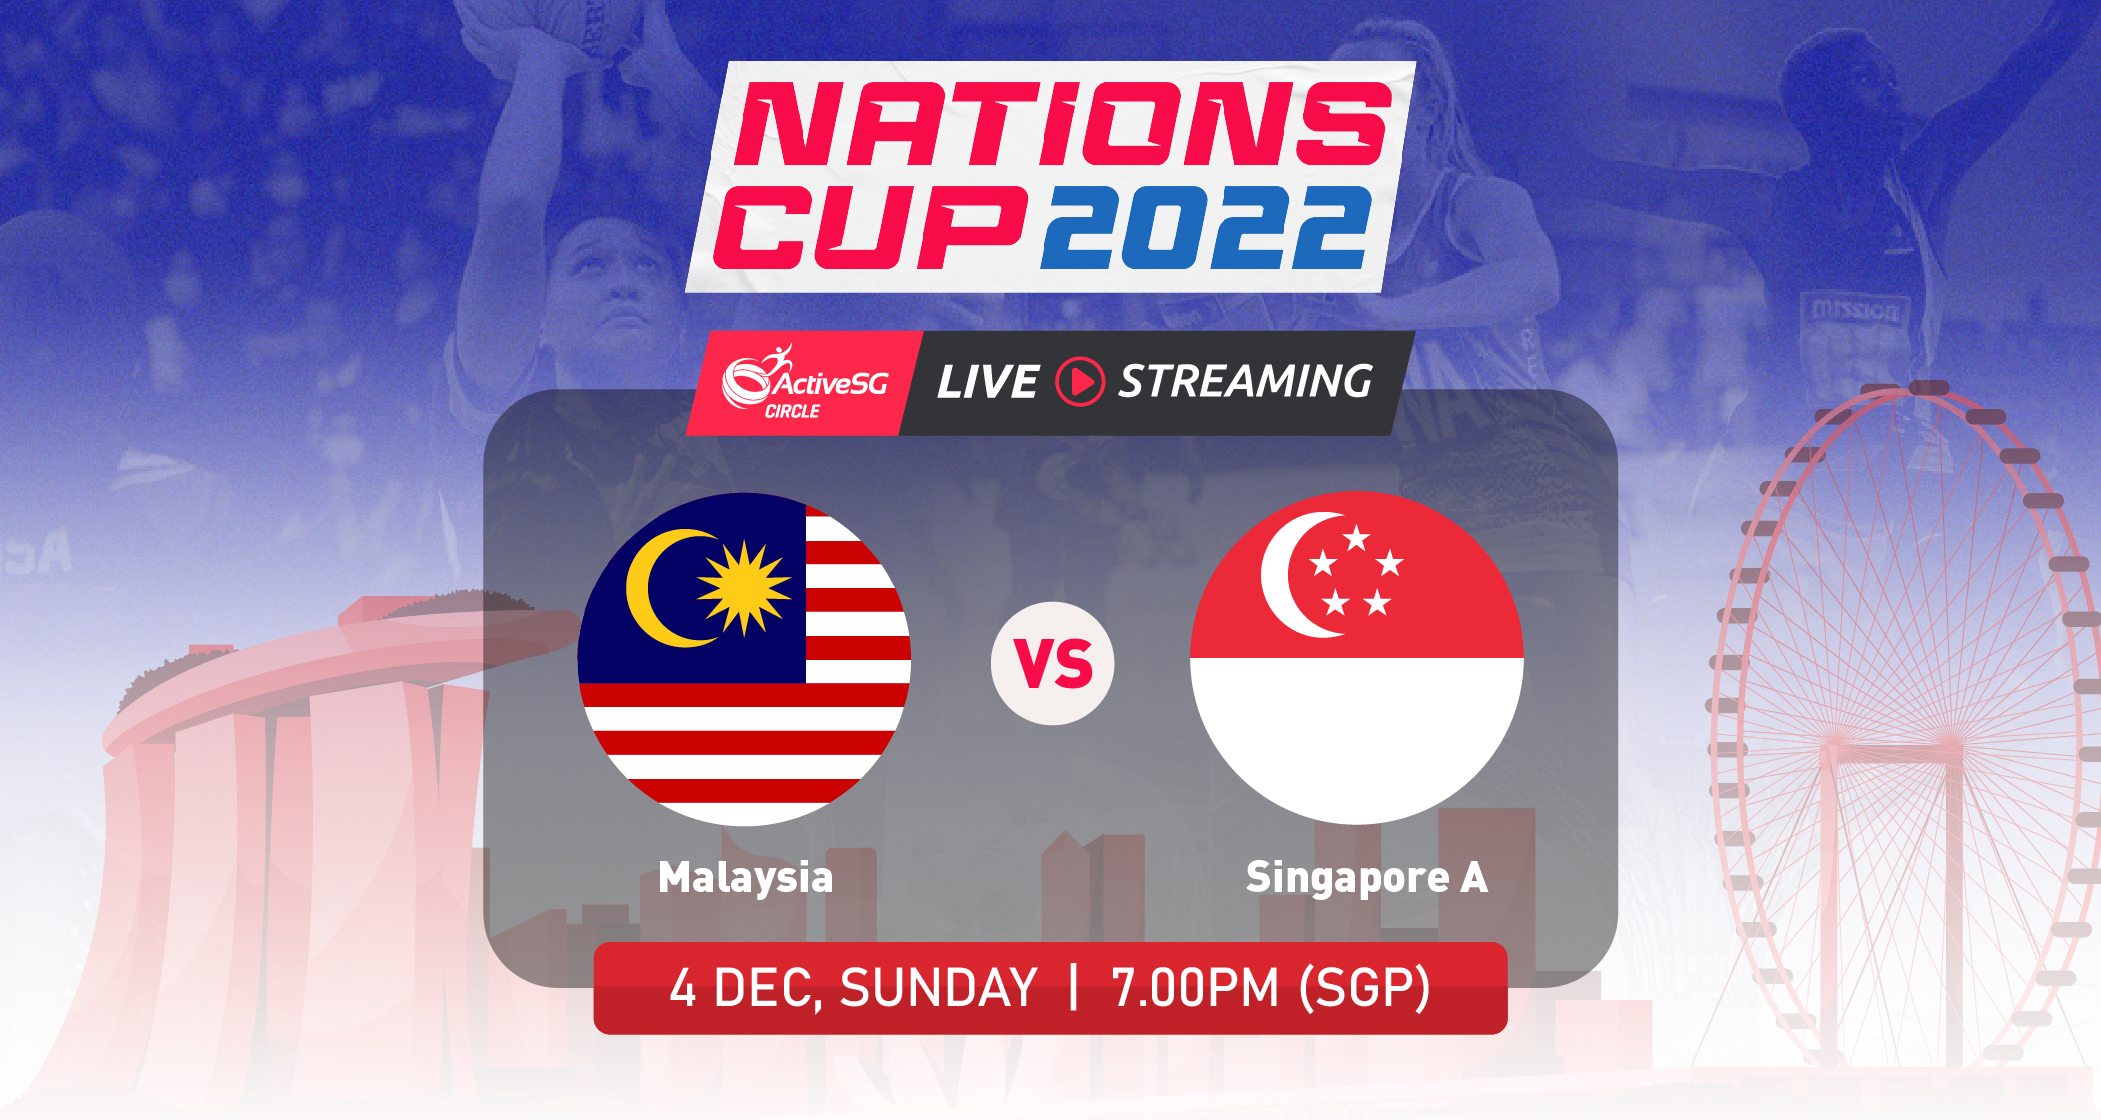 🔴 LIVE: Malaysia 🇲🇾 vs 🇸🇬 Singapore A | Nations Cup 2022